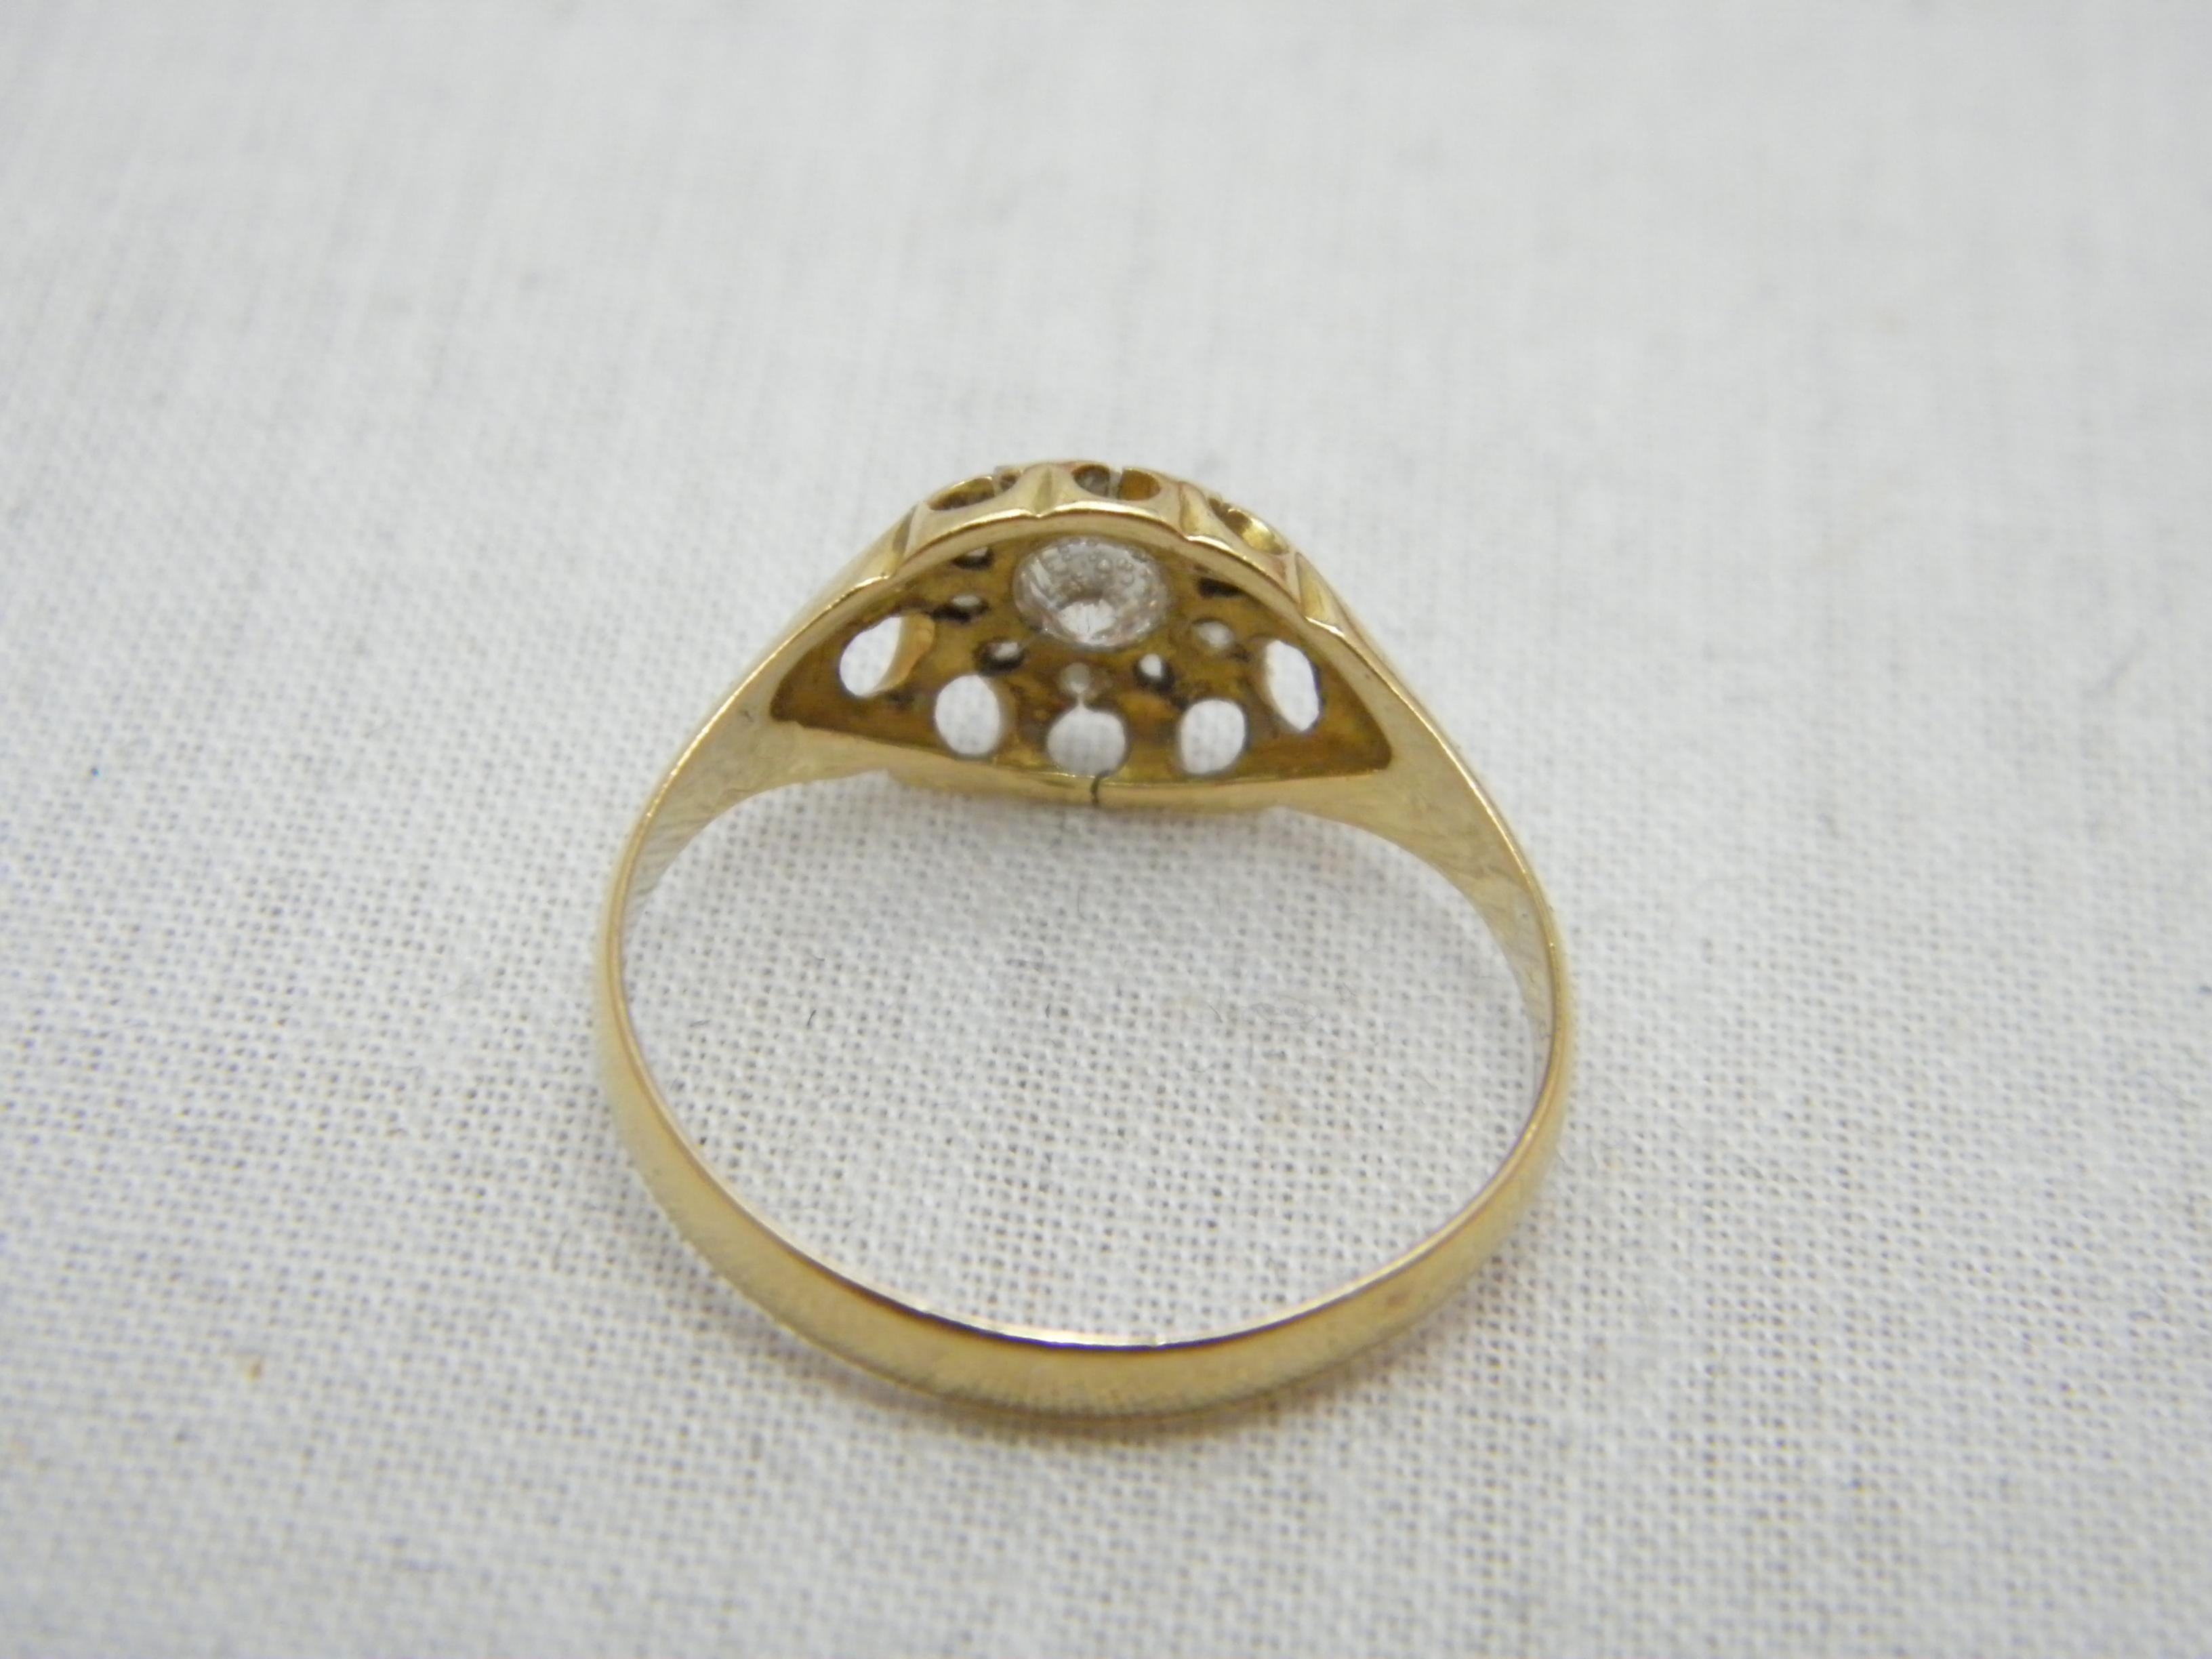 Antique 18ct Gold Diamond Halo Cluster Gypsy Ring Size N 6.75 750 Purity Chester For Sale 1